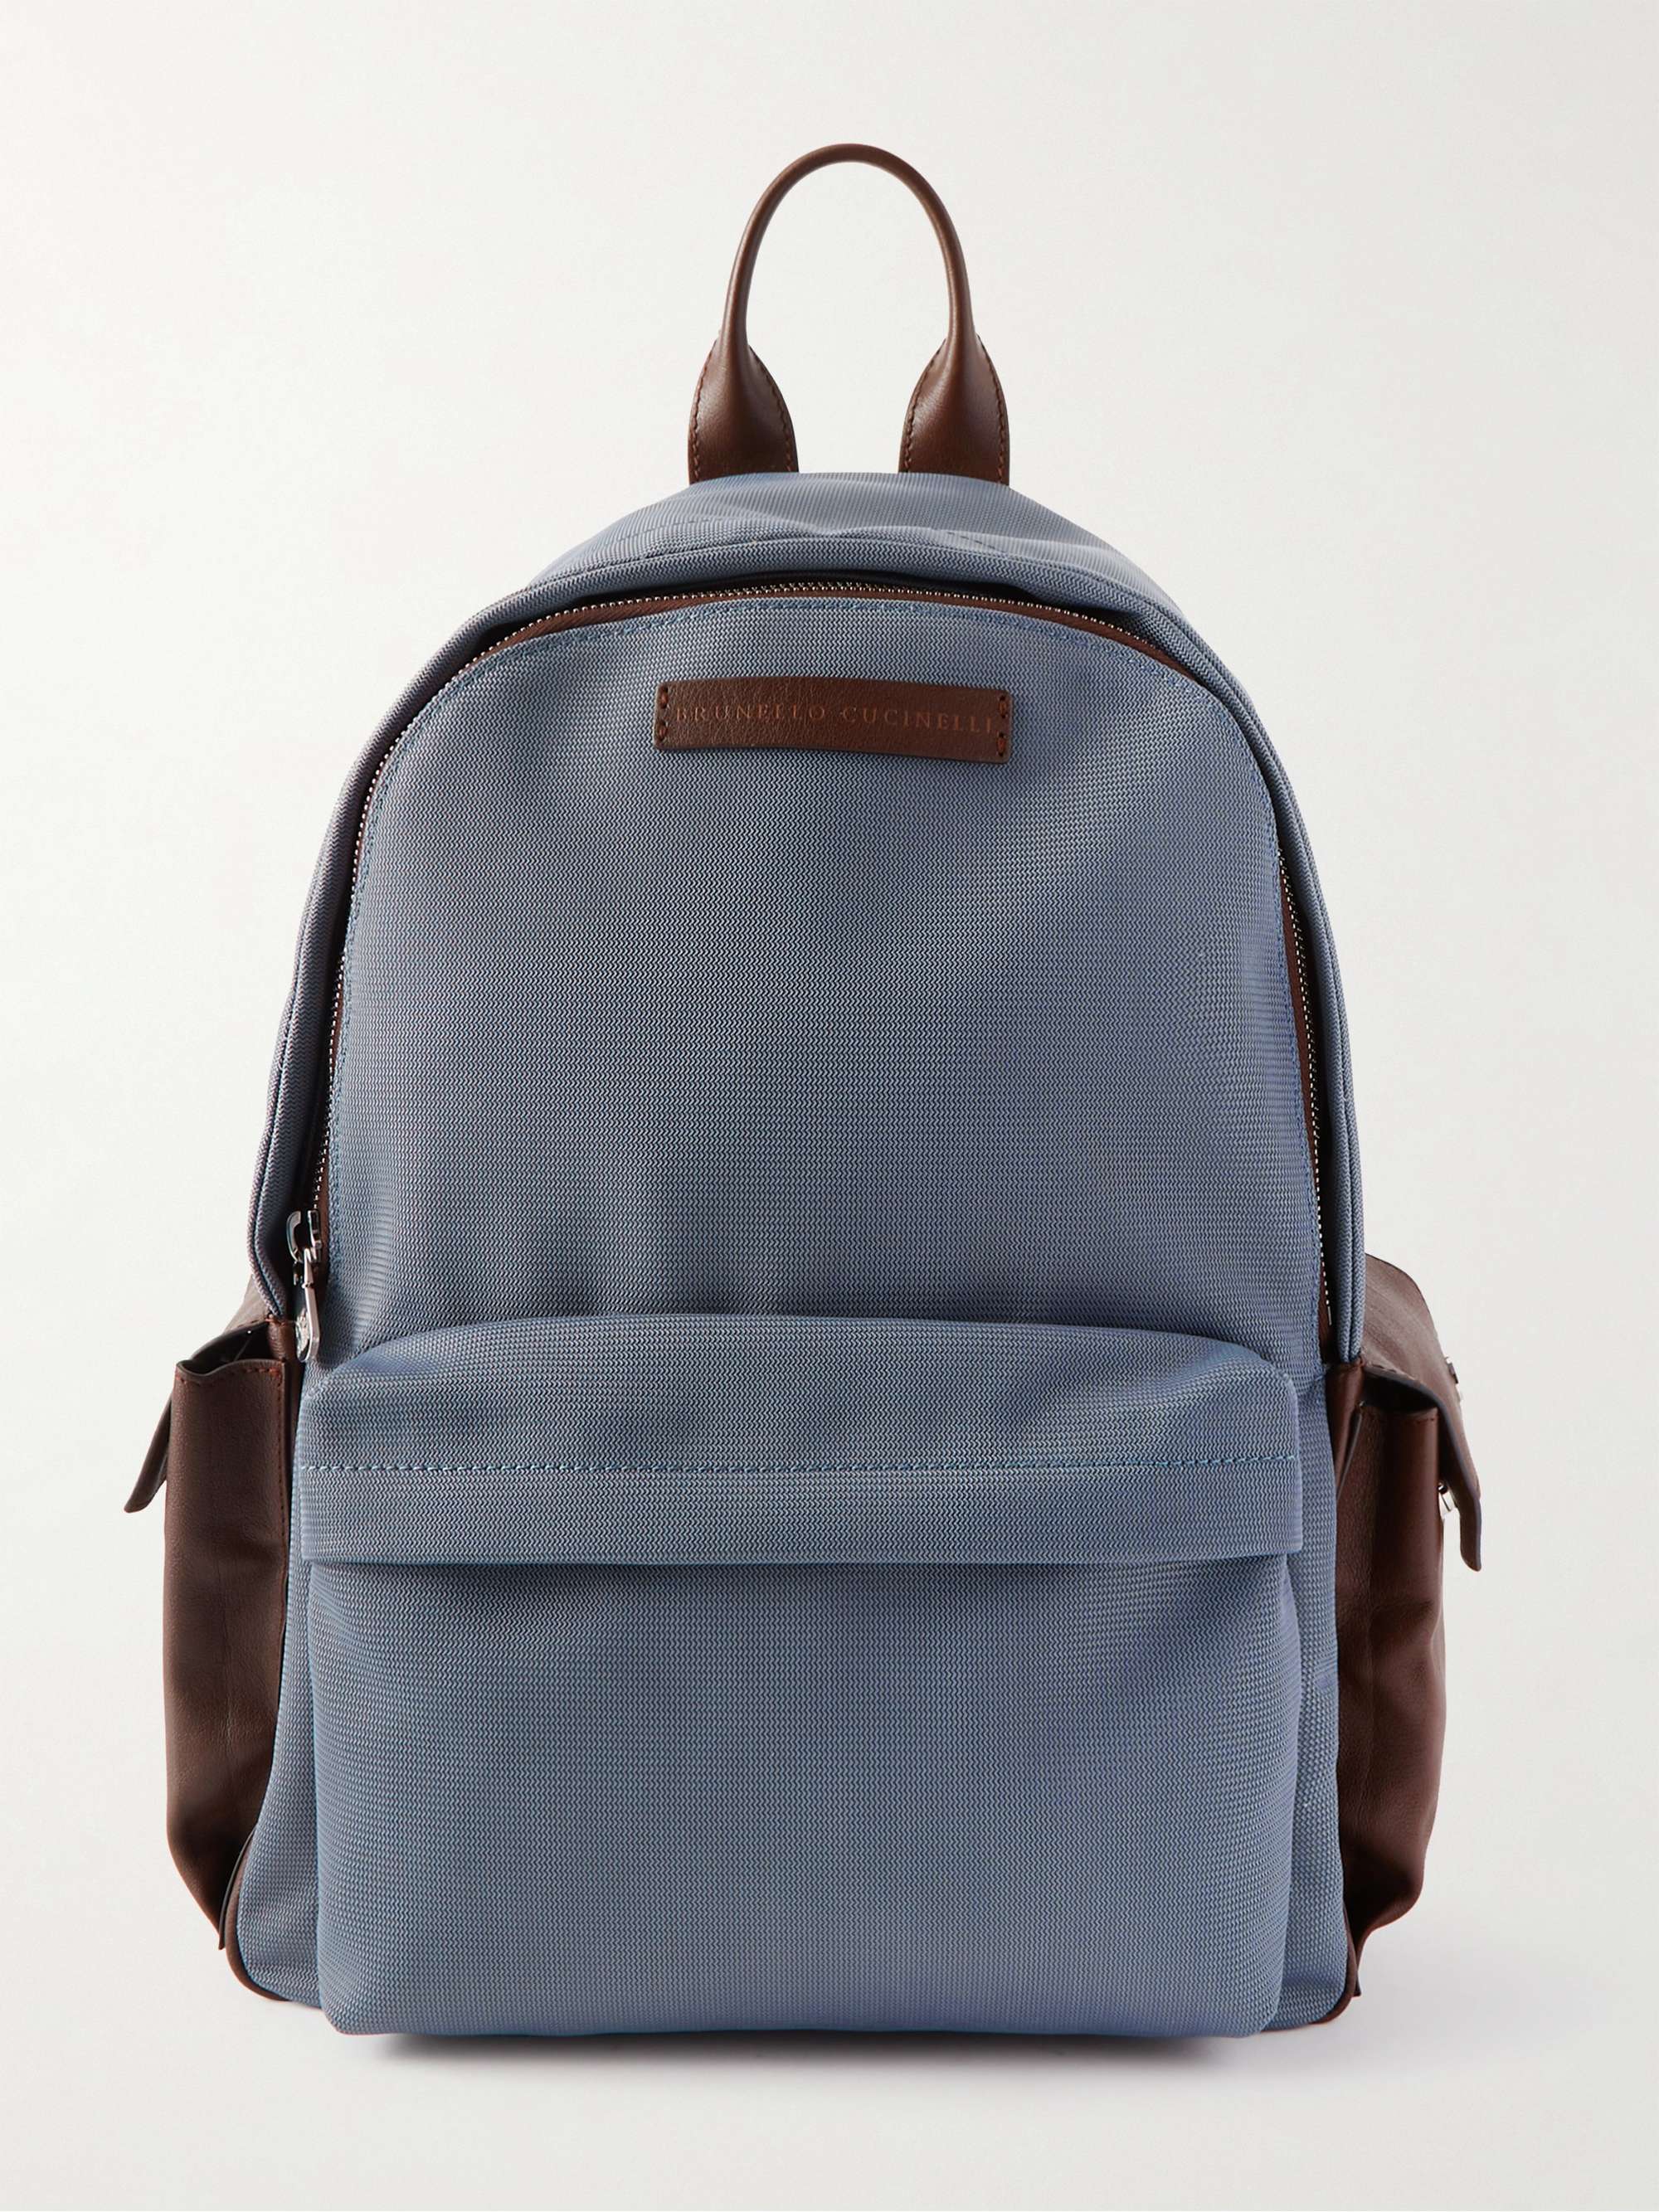 BRUNELLO CUCINELLI Leather-Trimmed Nylon Backpack